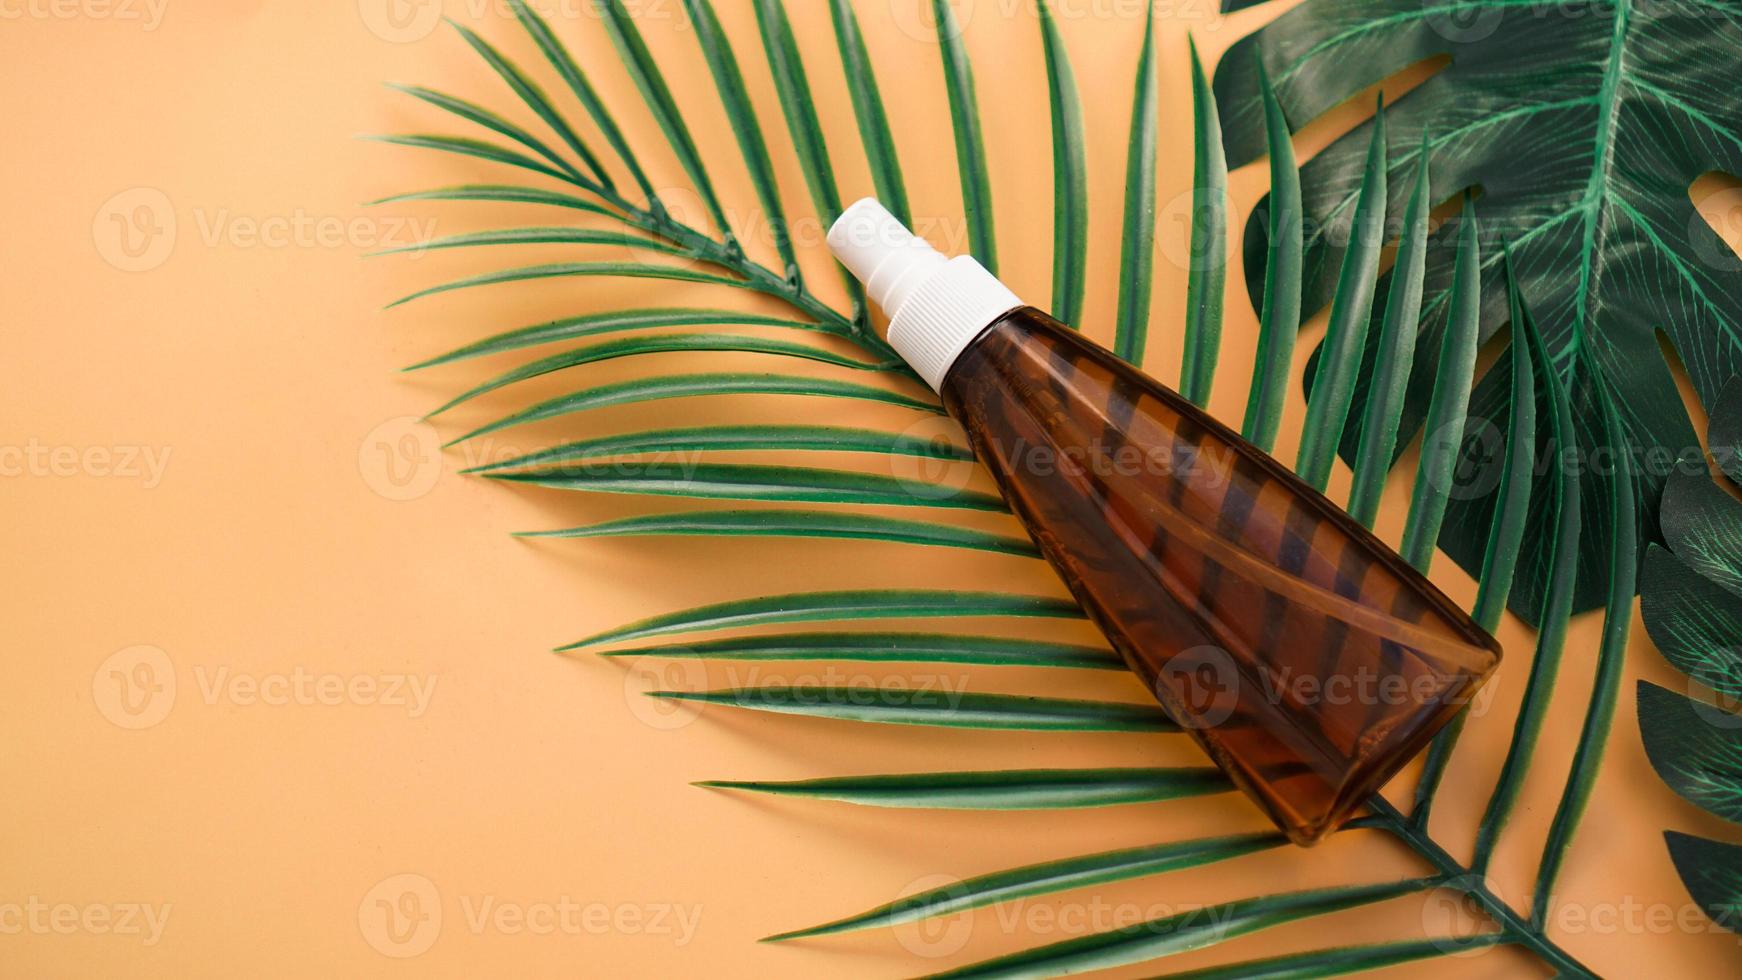 Suntan lotion bottle on background with tropical leaf photo